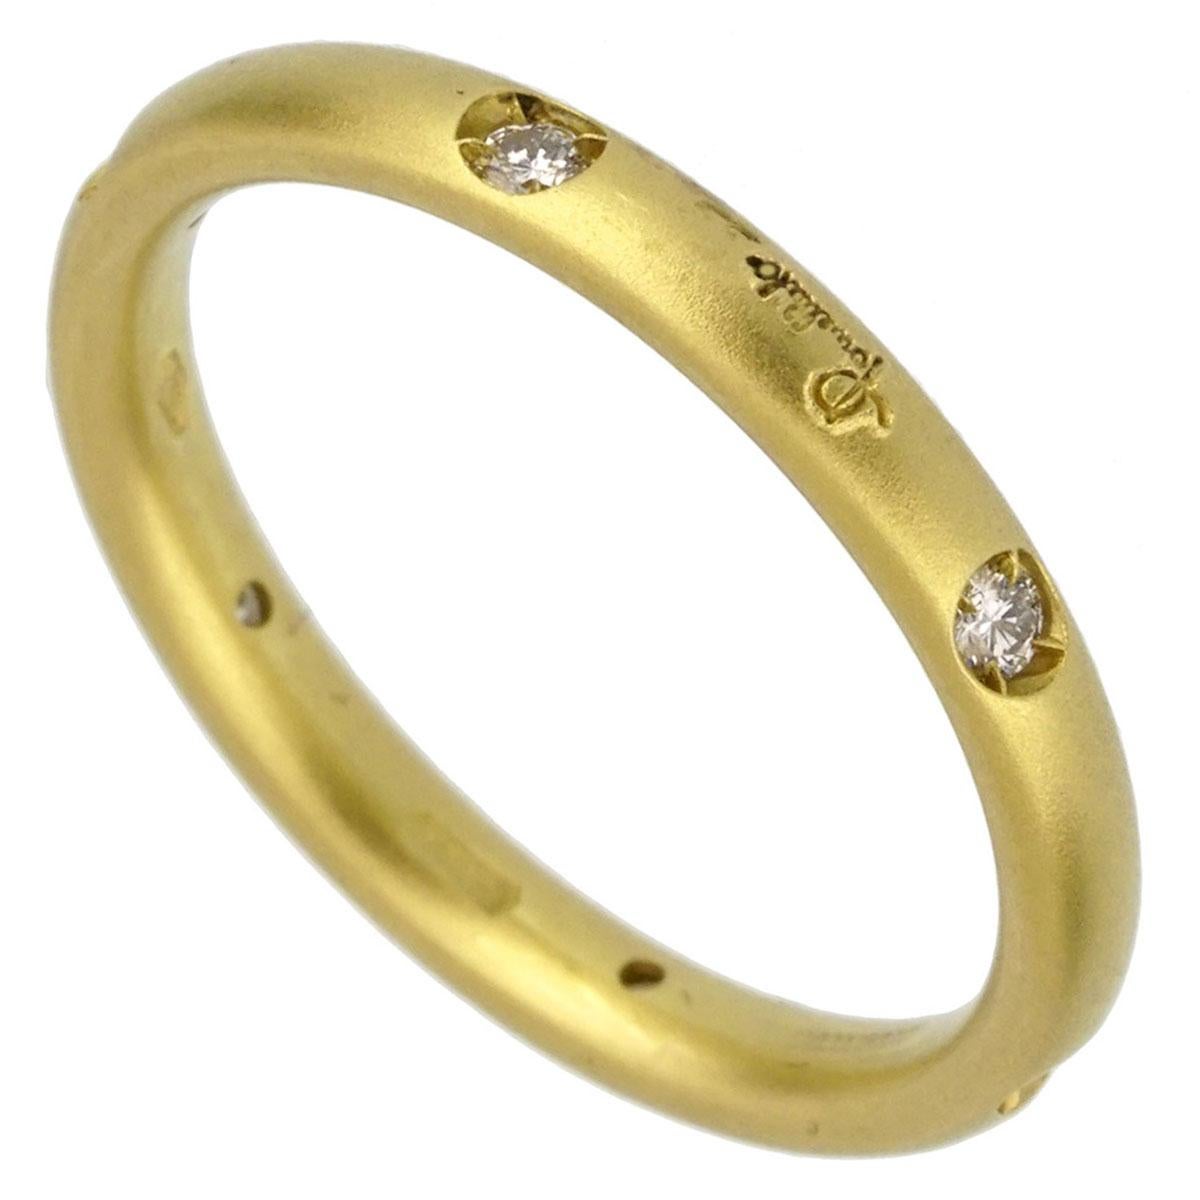 A chic brand new Pomellato diamond ring adorned with round brilliant cut diamonds in 18k yellow gold. The ring measures a size 6 1/2

Sku: 2362